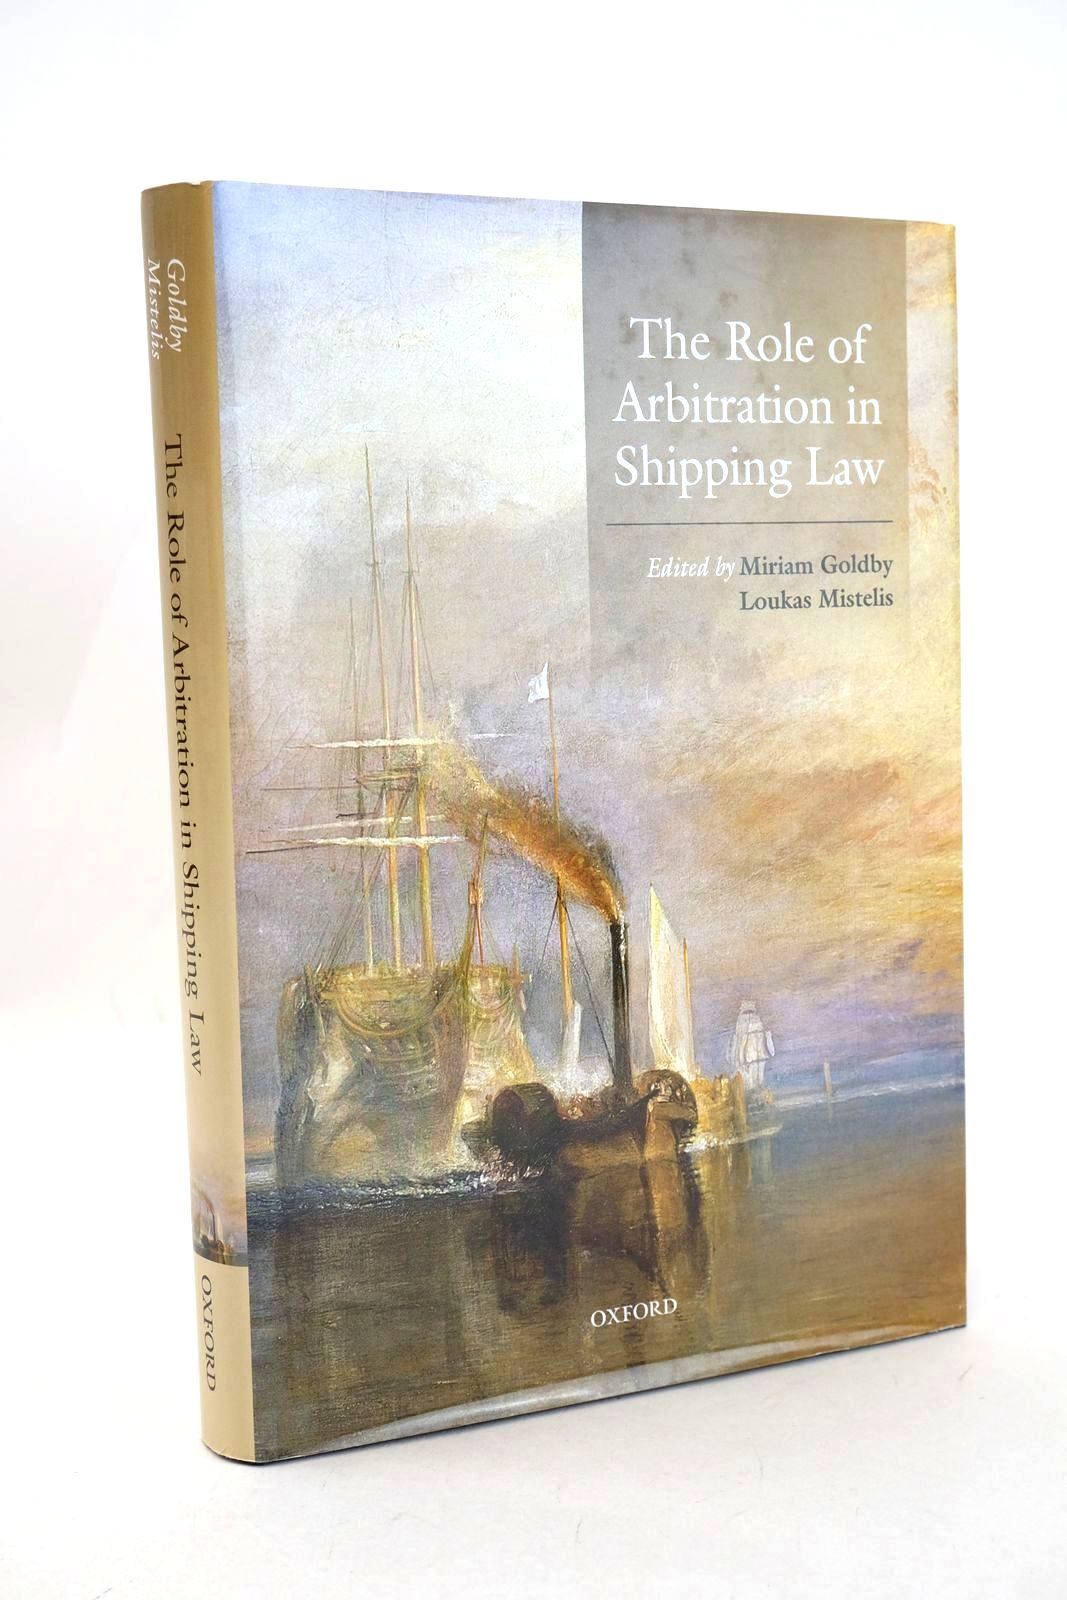 Photo of THE ROLE OF ARBITRATION IN SHIPPING LAW written by Goldby, Miriam Mistelis, Loukas published by Oxford University Press (STOCK CODE: 1327130)  for sale by Stella & Rose's Books